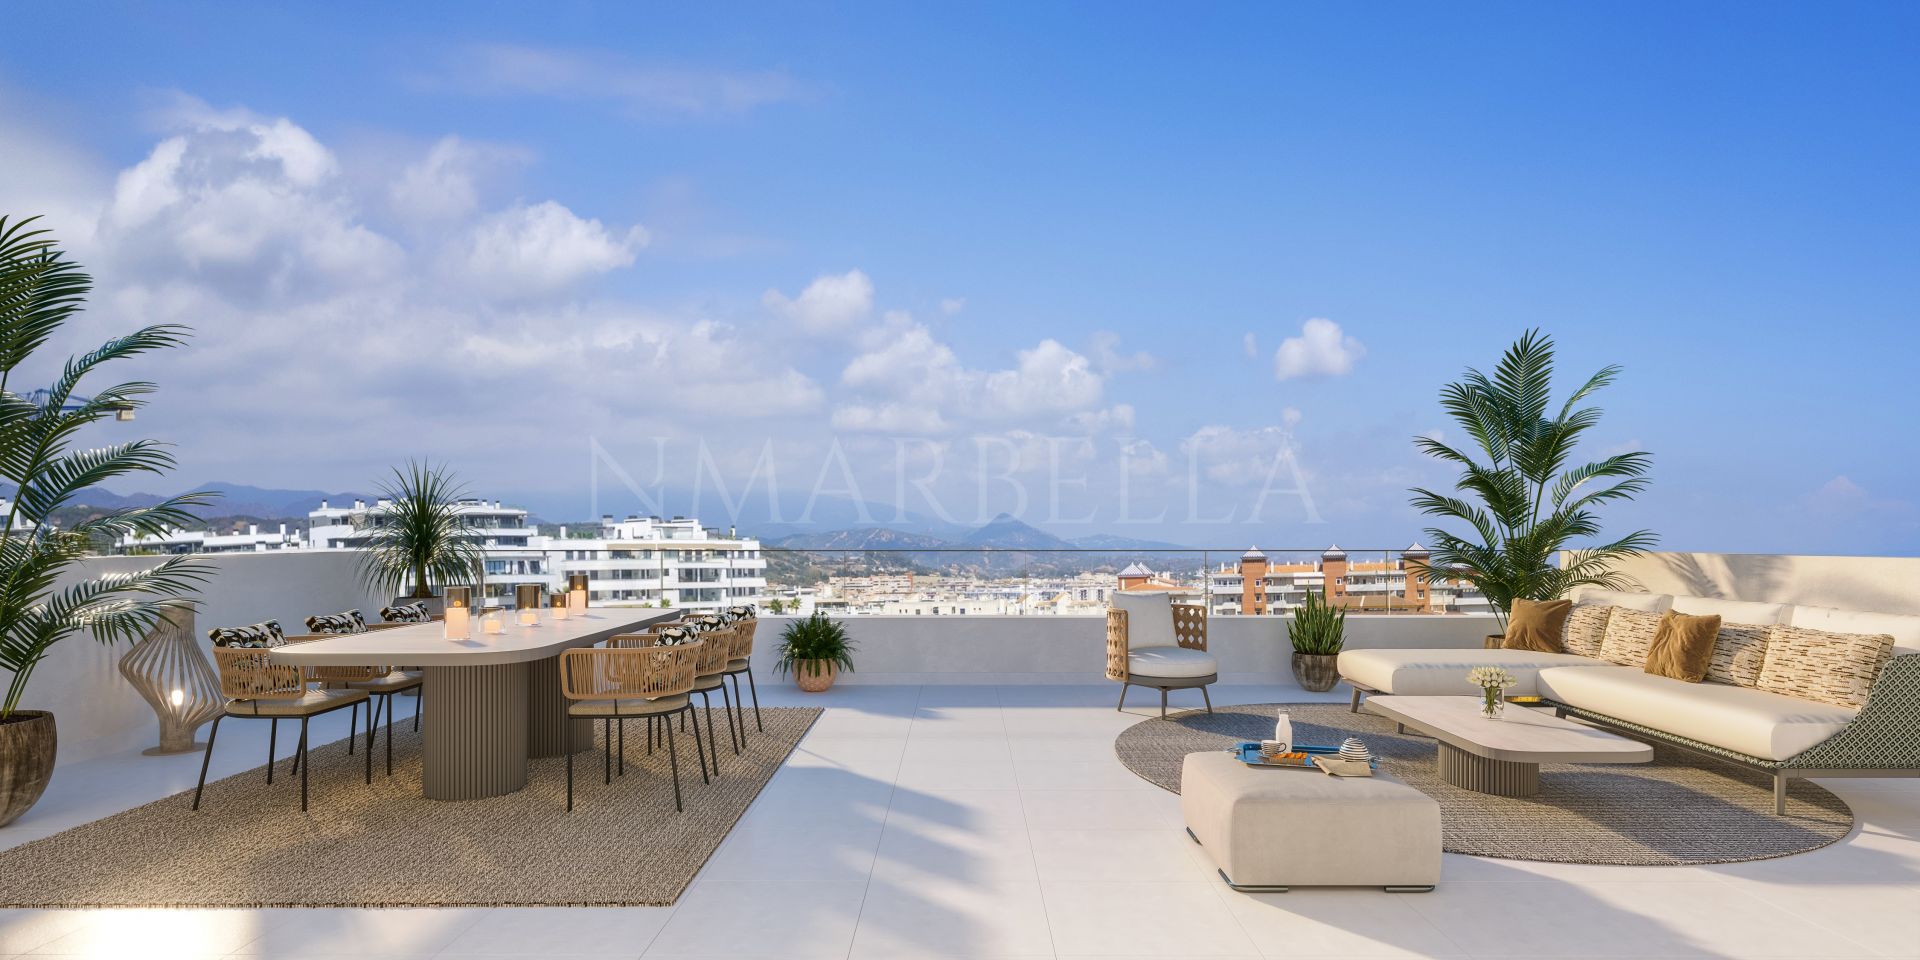 New apartment under construction for sale in Estepona port area